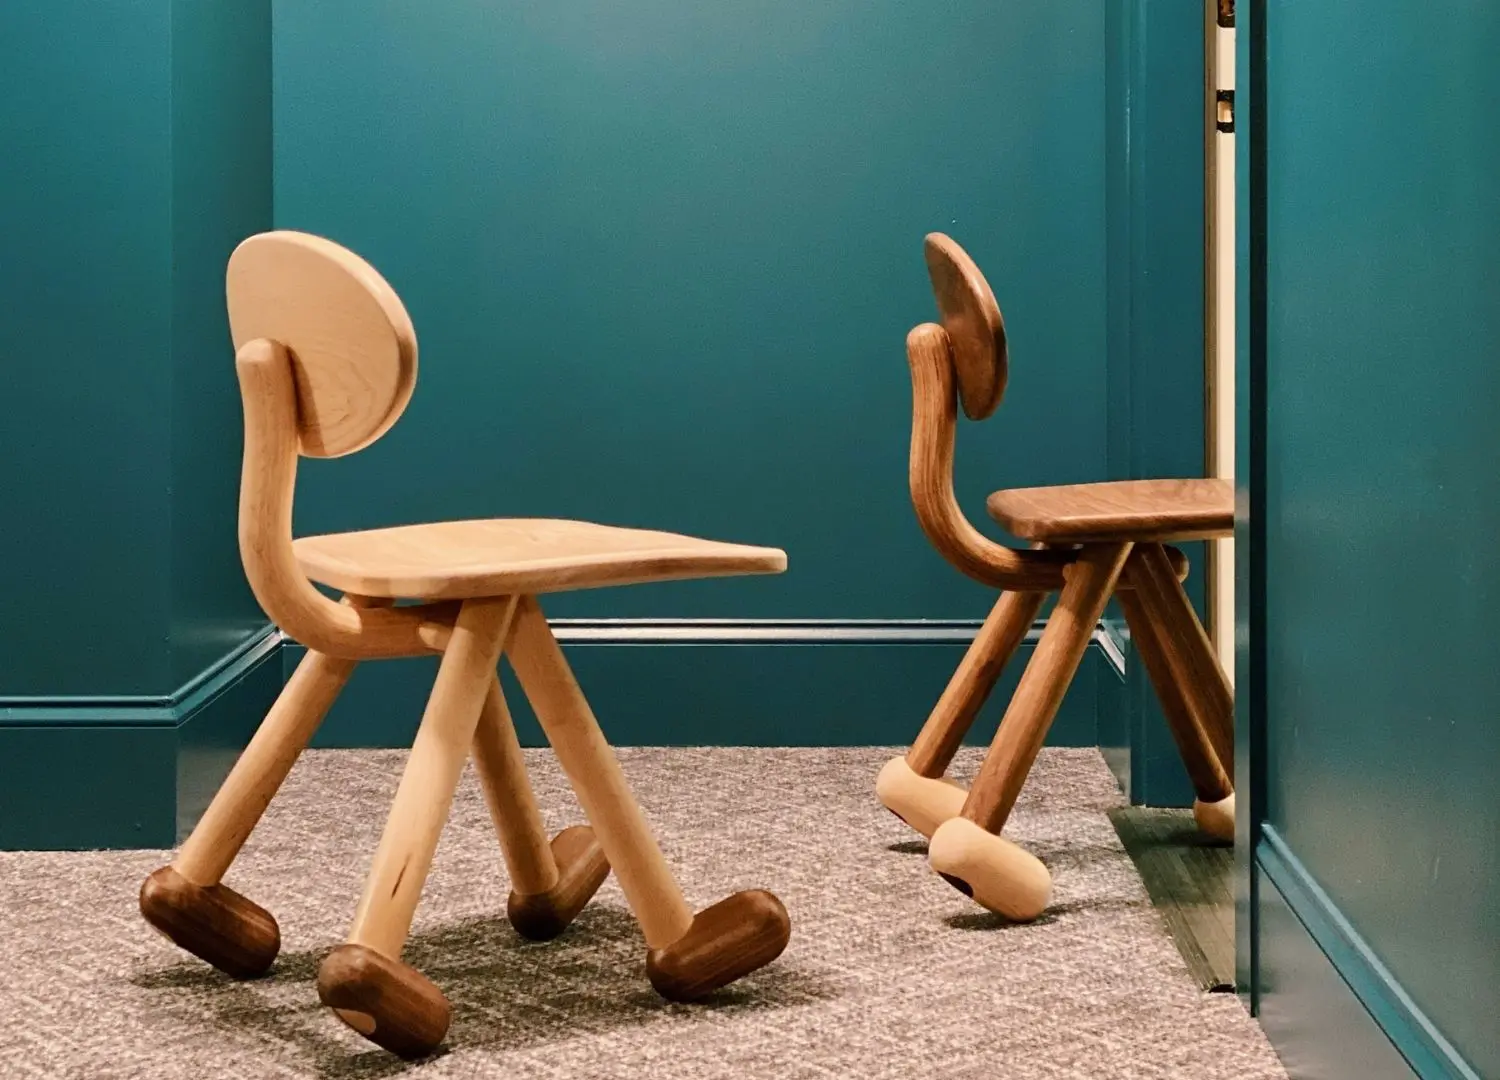 Walky chair by Design VA